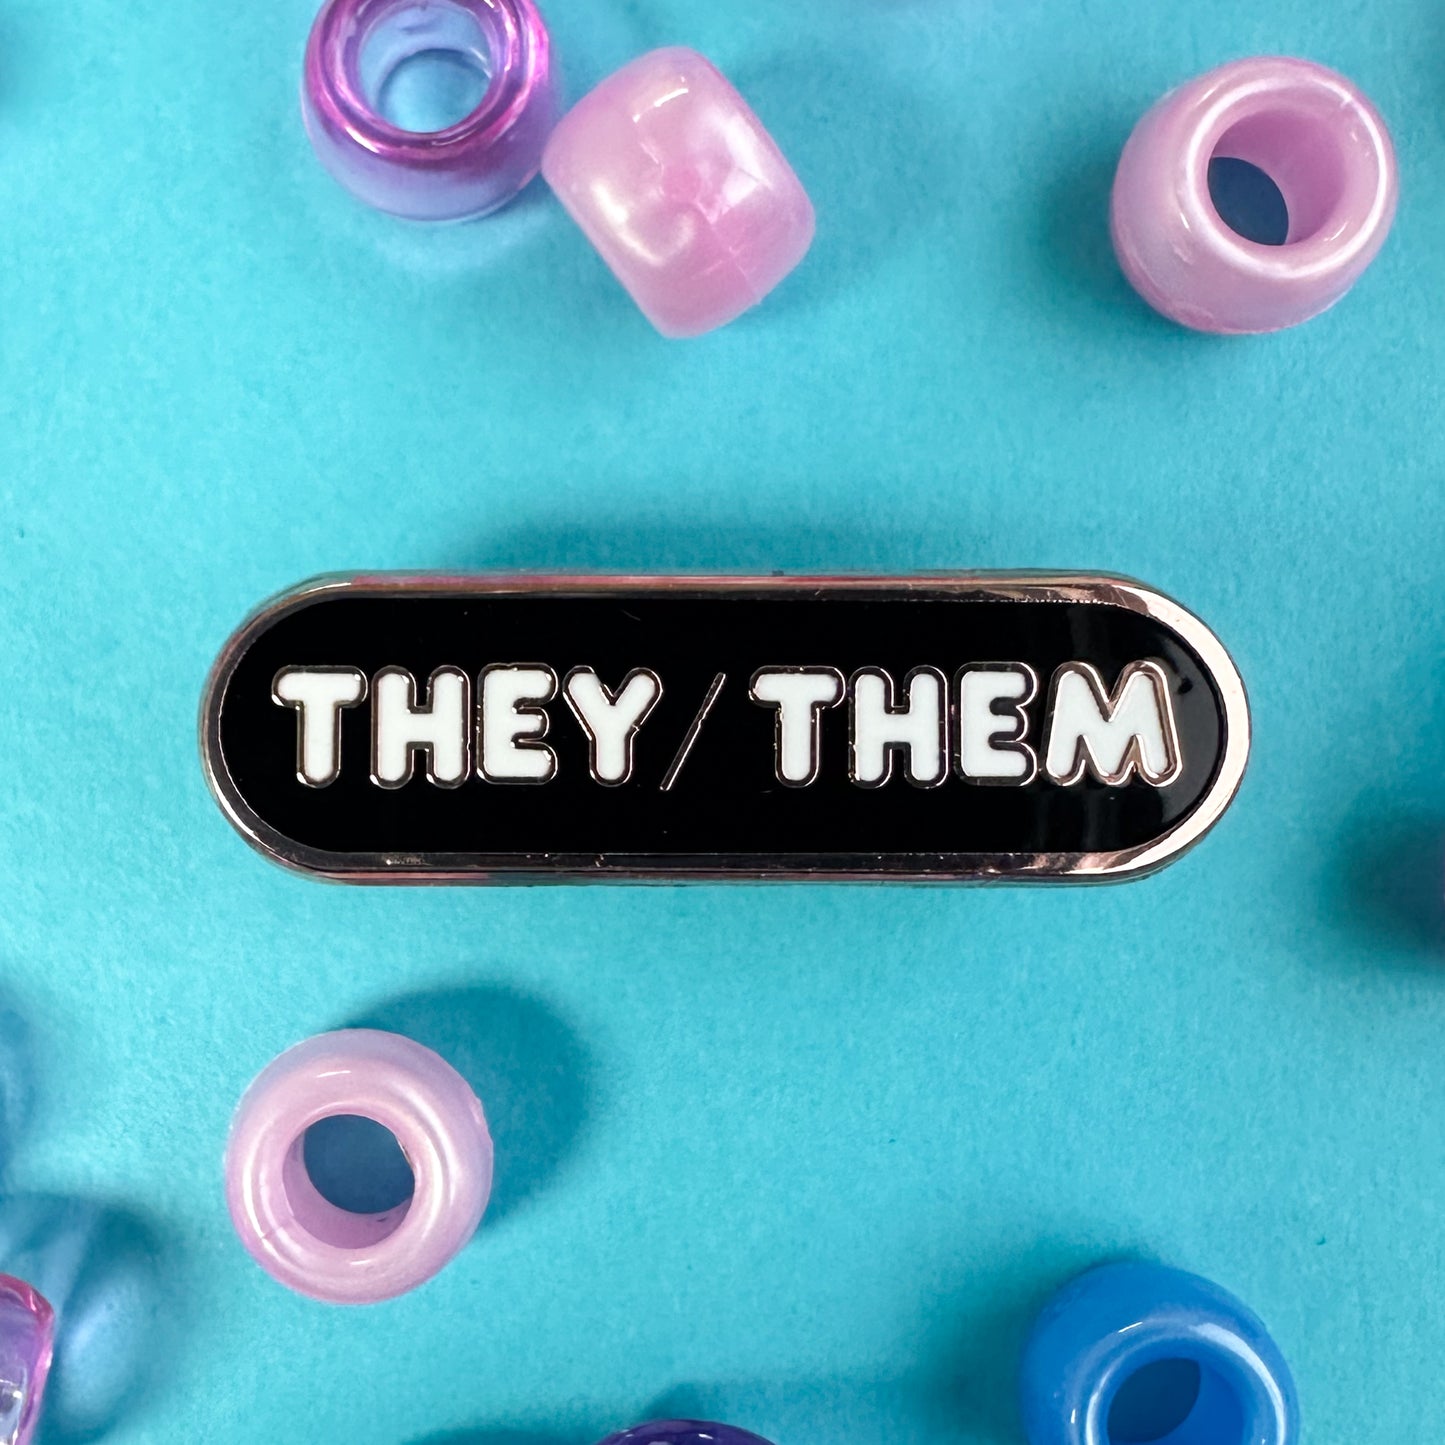 A black oval pin with the pronouns "They/Them" written on it in white bubble letters. The pin is on a blue background with pink and blue pony beads around them. 